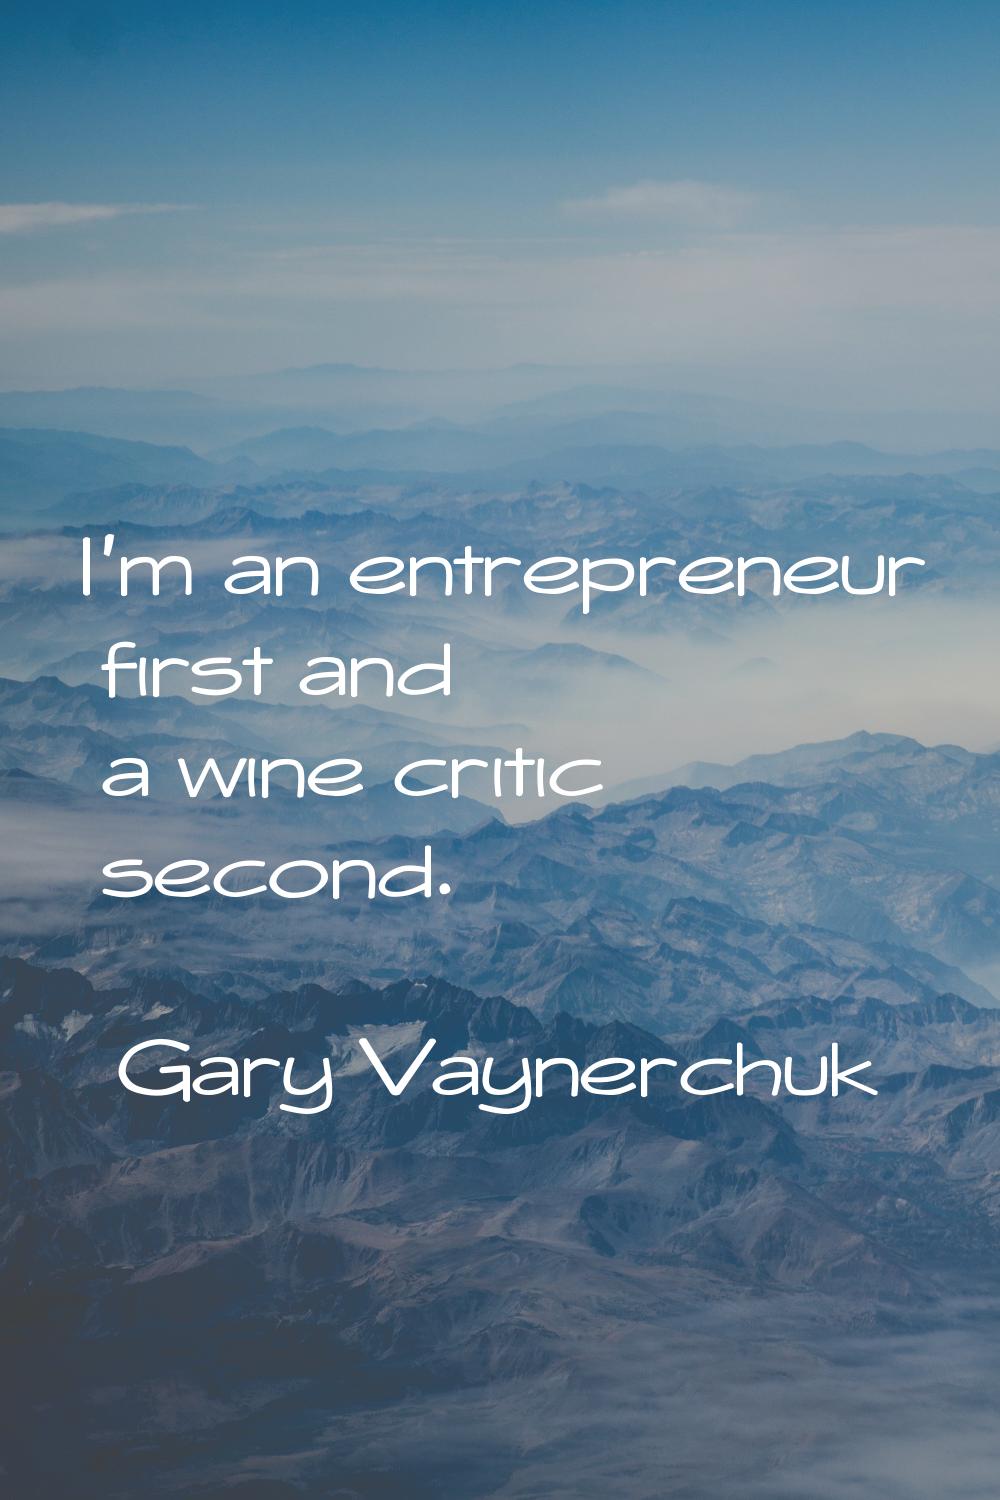 I'm an entrepreneur first and a wine critic second.